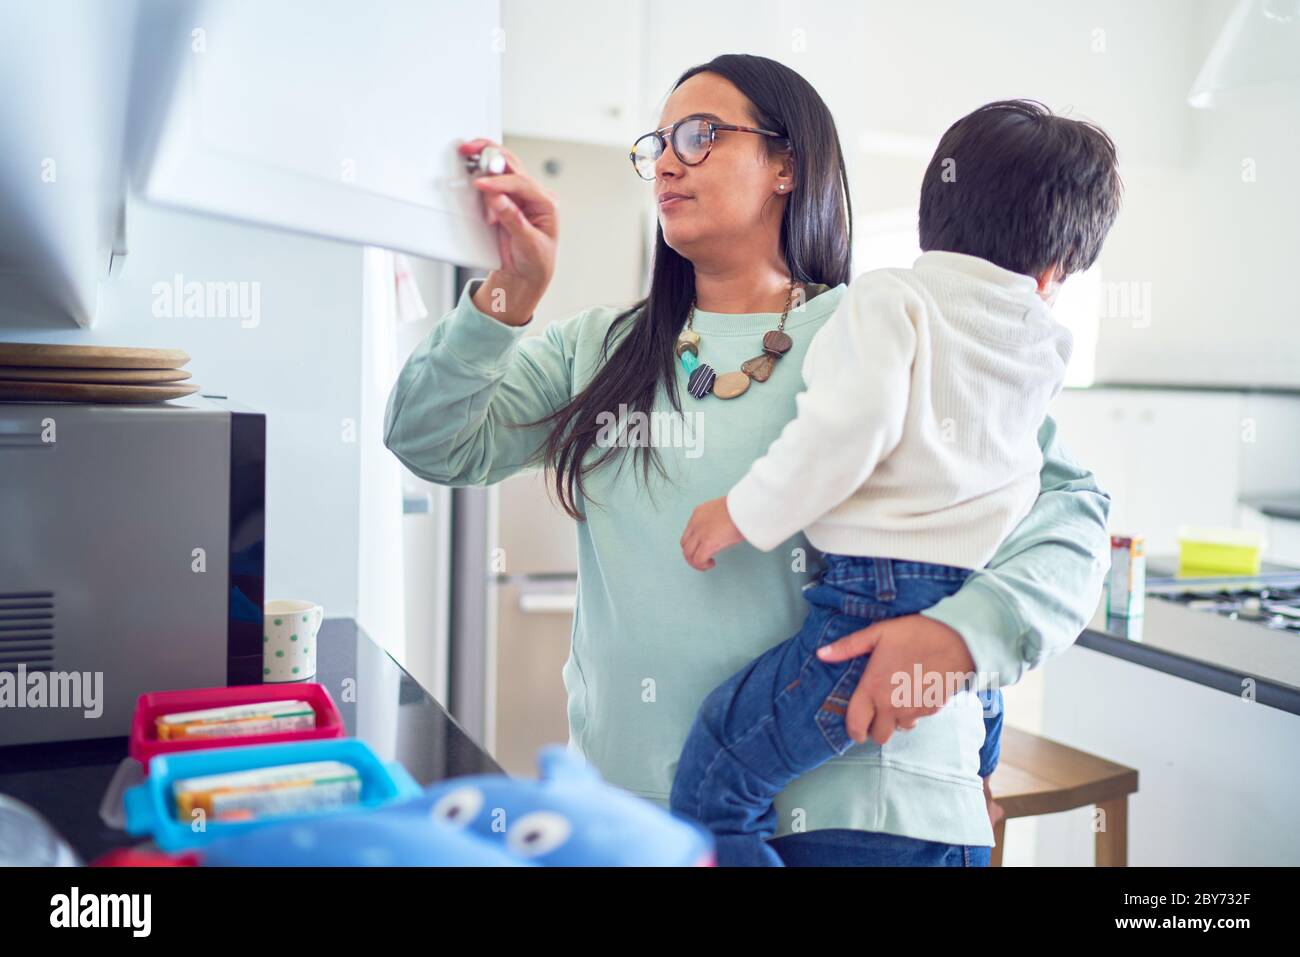 Mother holding son and preparing lunches in kitchen Stock Photo